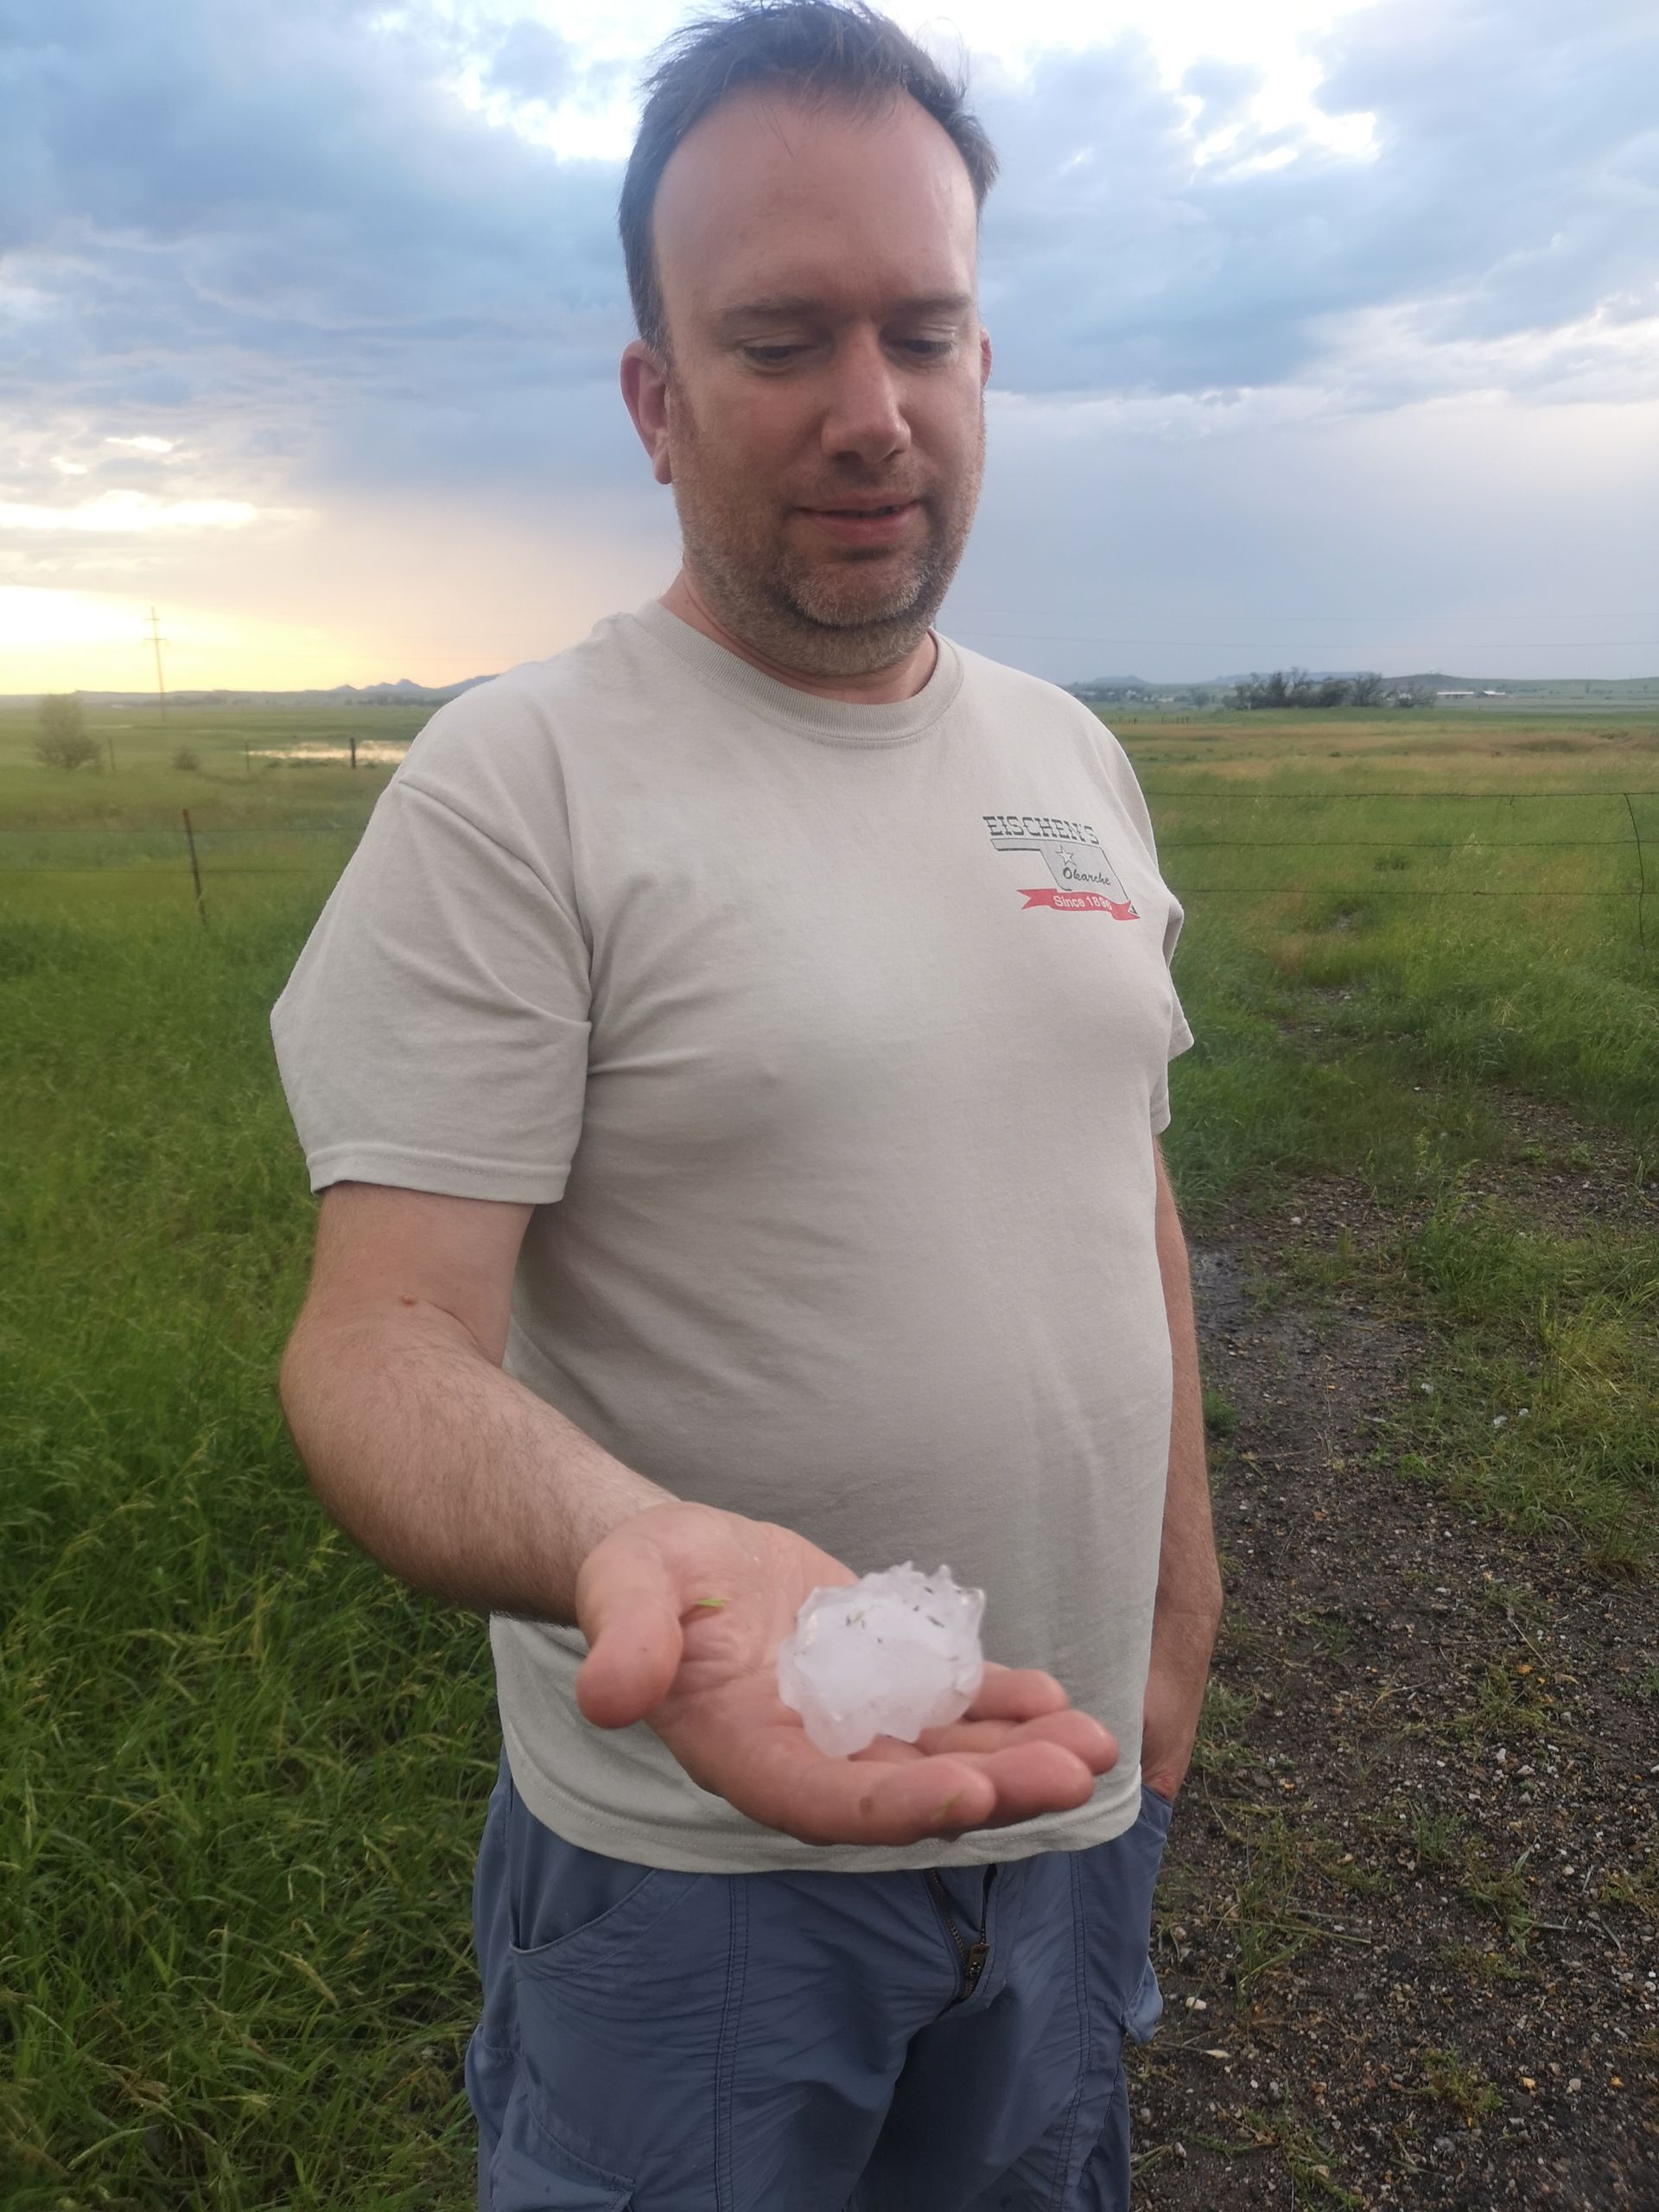 A man in a white shirt is holding a piece of hail in his hand